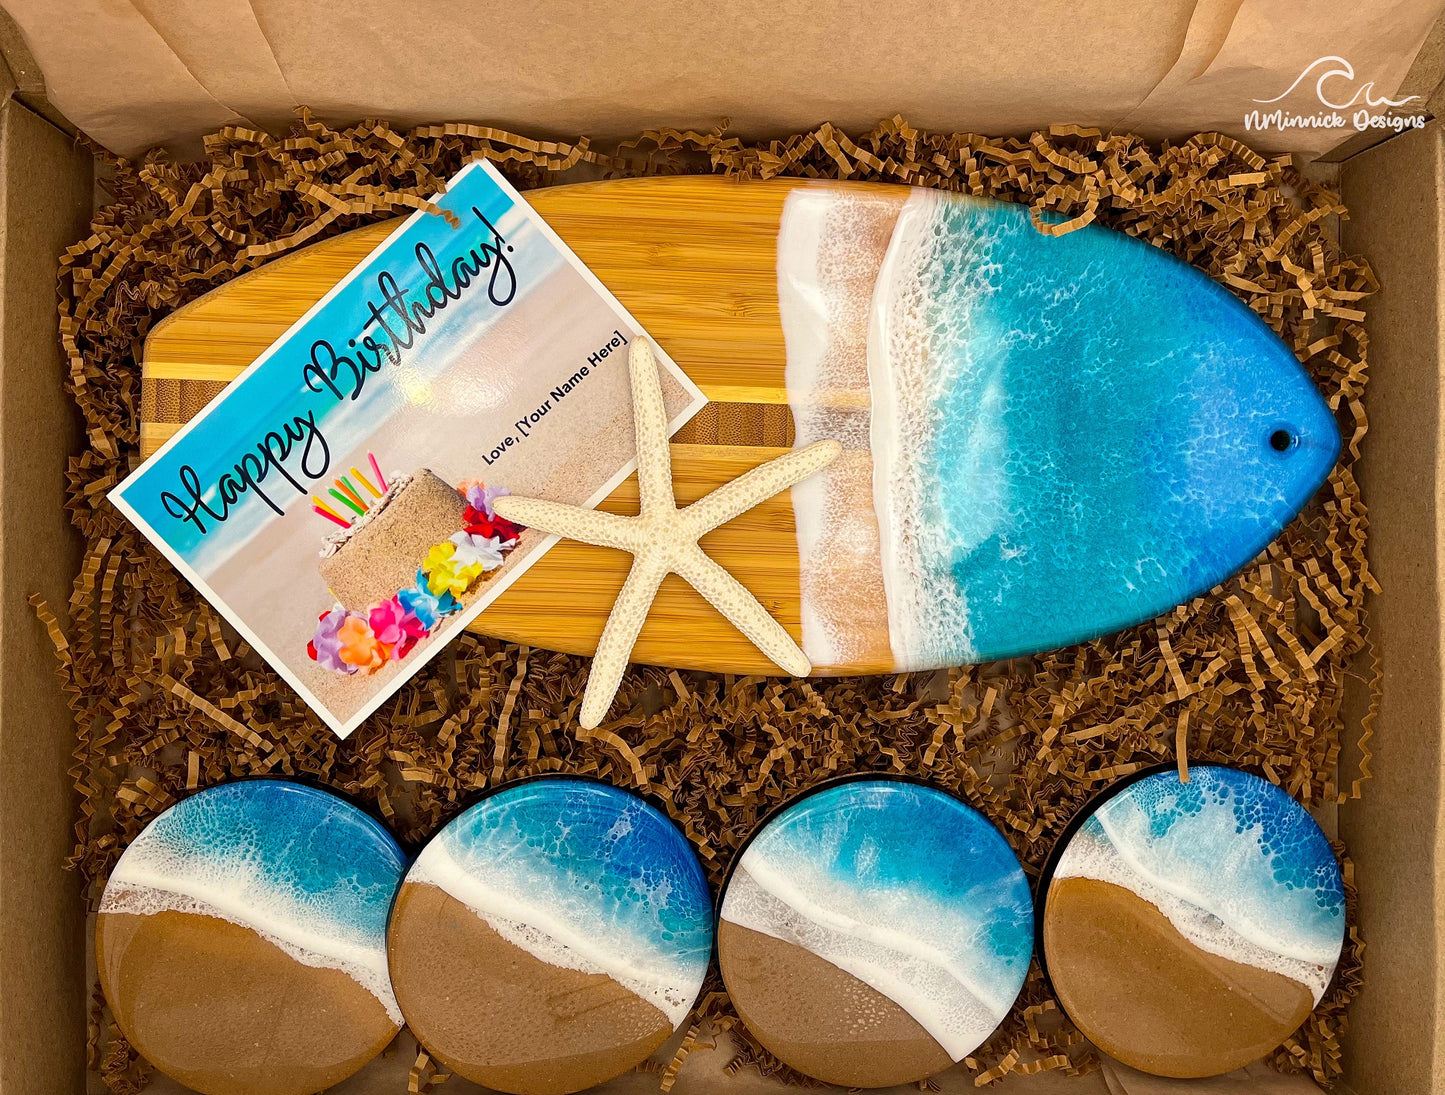 Surfboard-shaped bamboo charcuterie board. Top portion covered in blue and teal ocean resin art resembling the waves of the ocean. Four matching round blue and teal ocean resin drink coasters with real sand and cork backings. Shown packaged in a kraft colored eco-friendly and plastic-free gift box and a free Happy Birthday card.